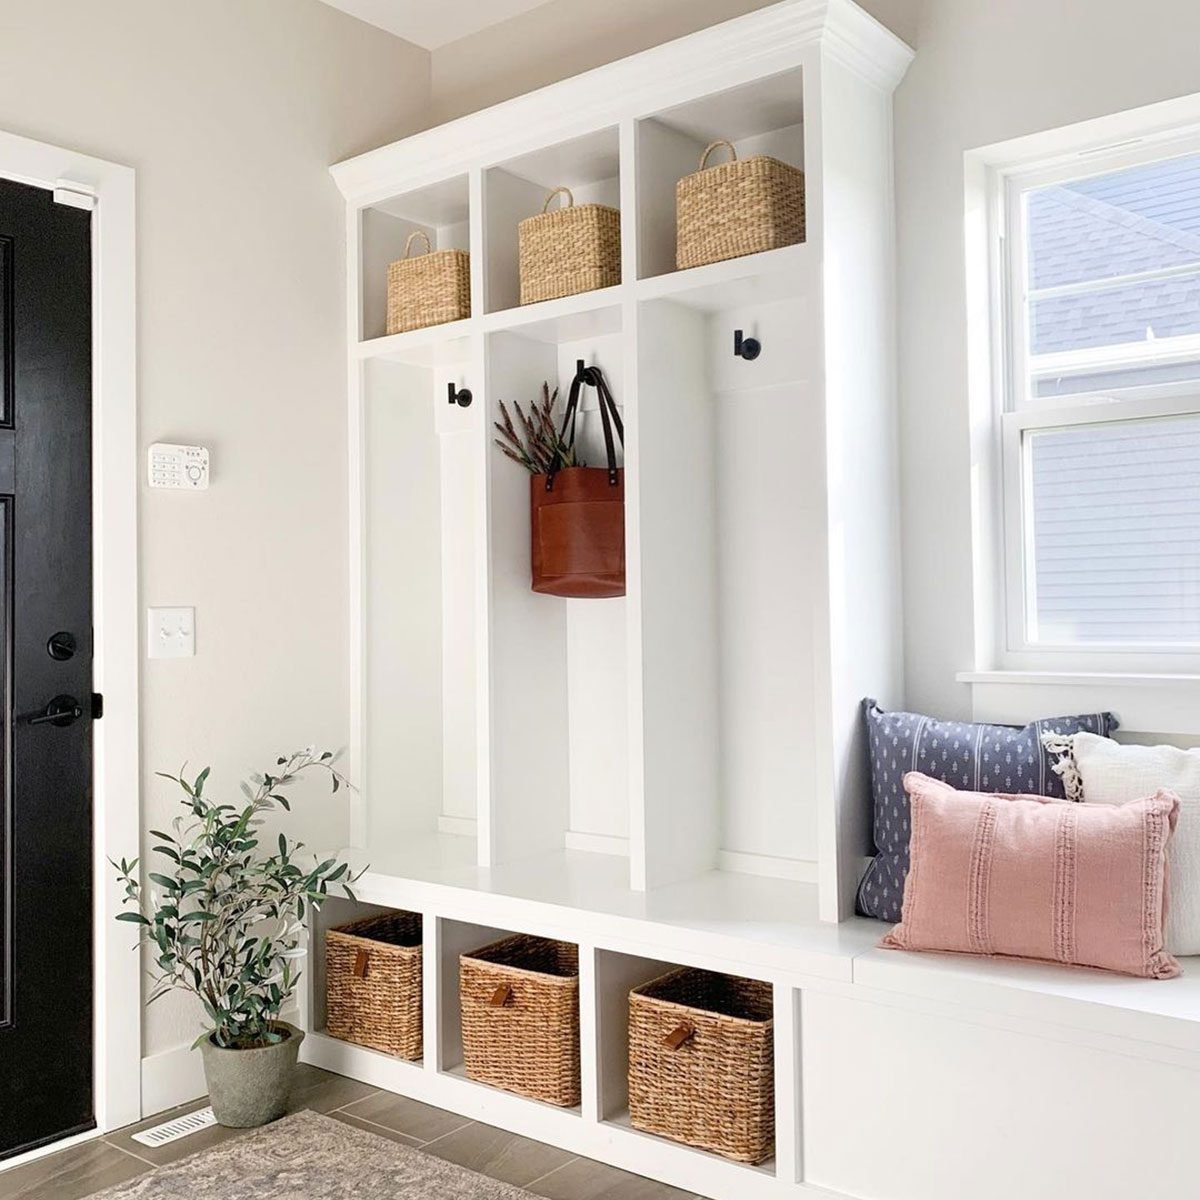 Entryway furniture ideas: 10 ways to use on-trend furniture in an entrance